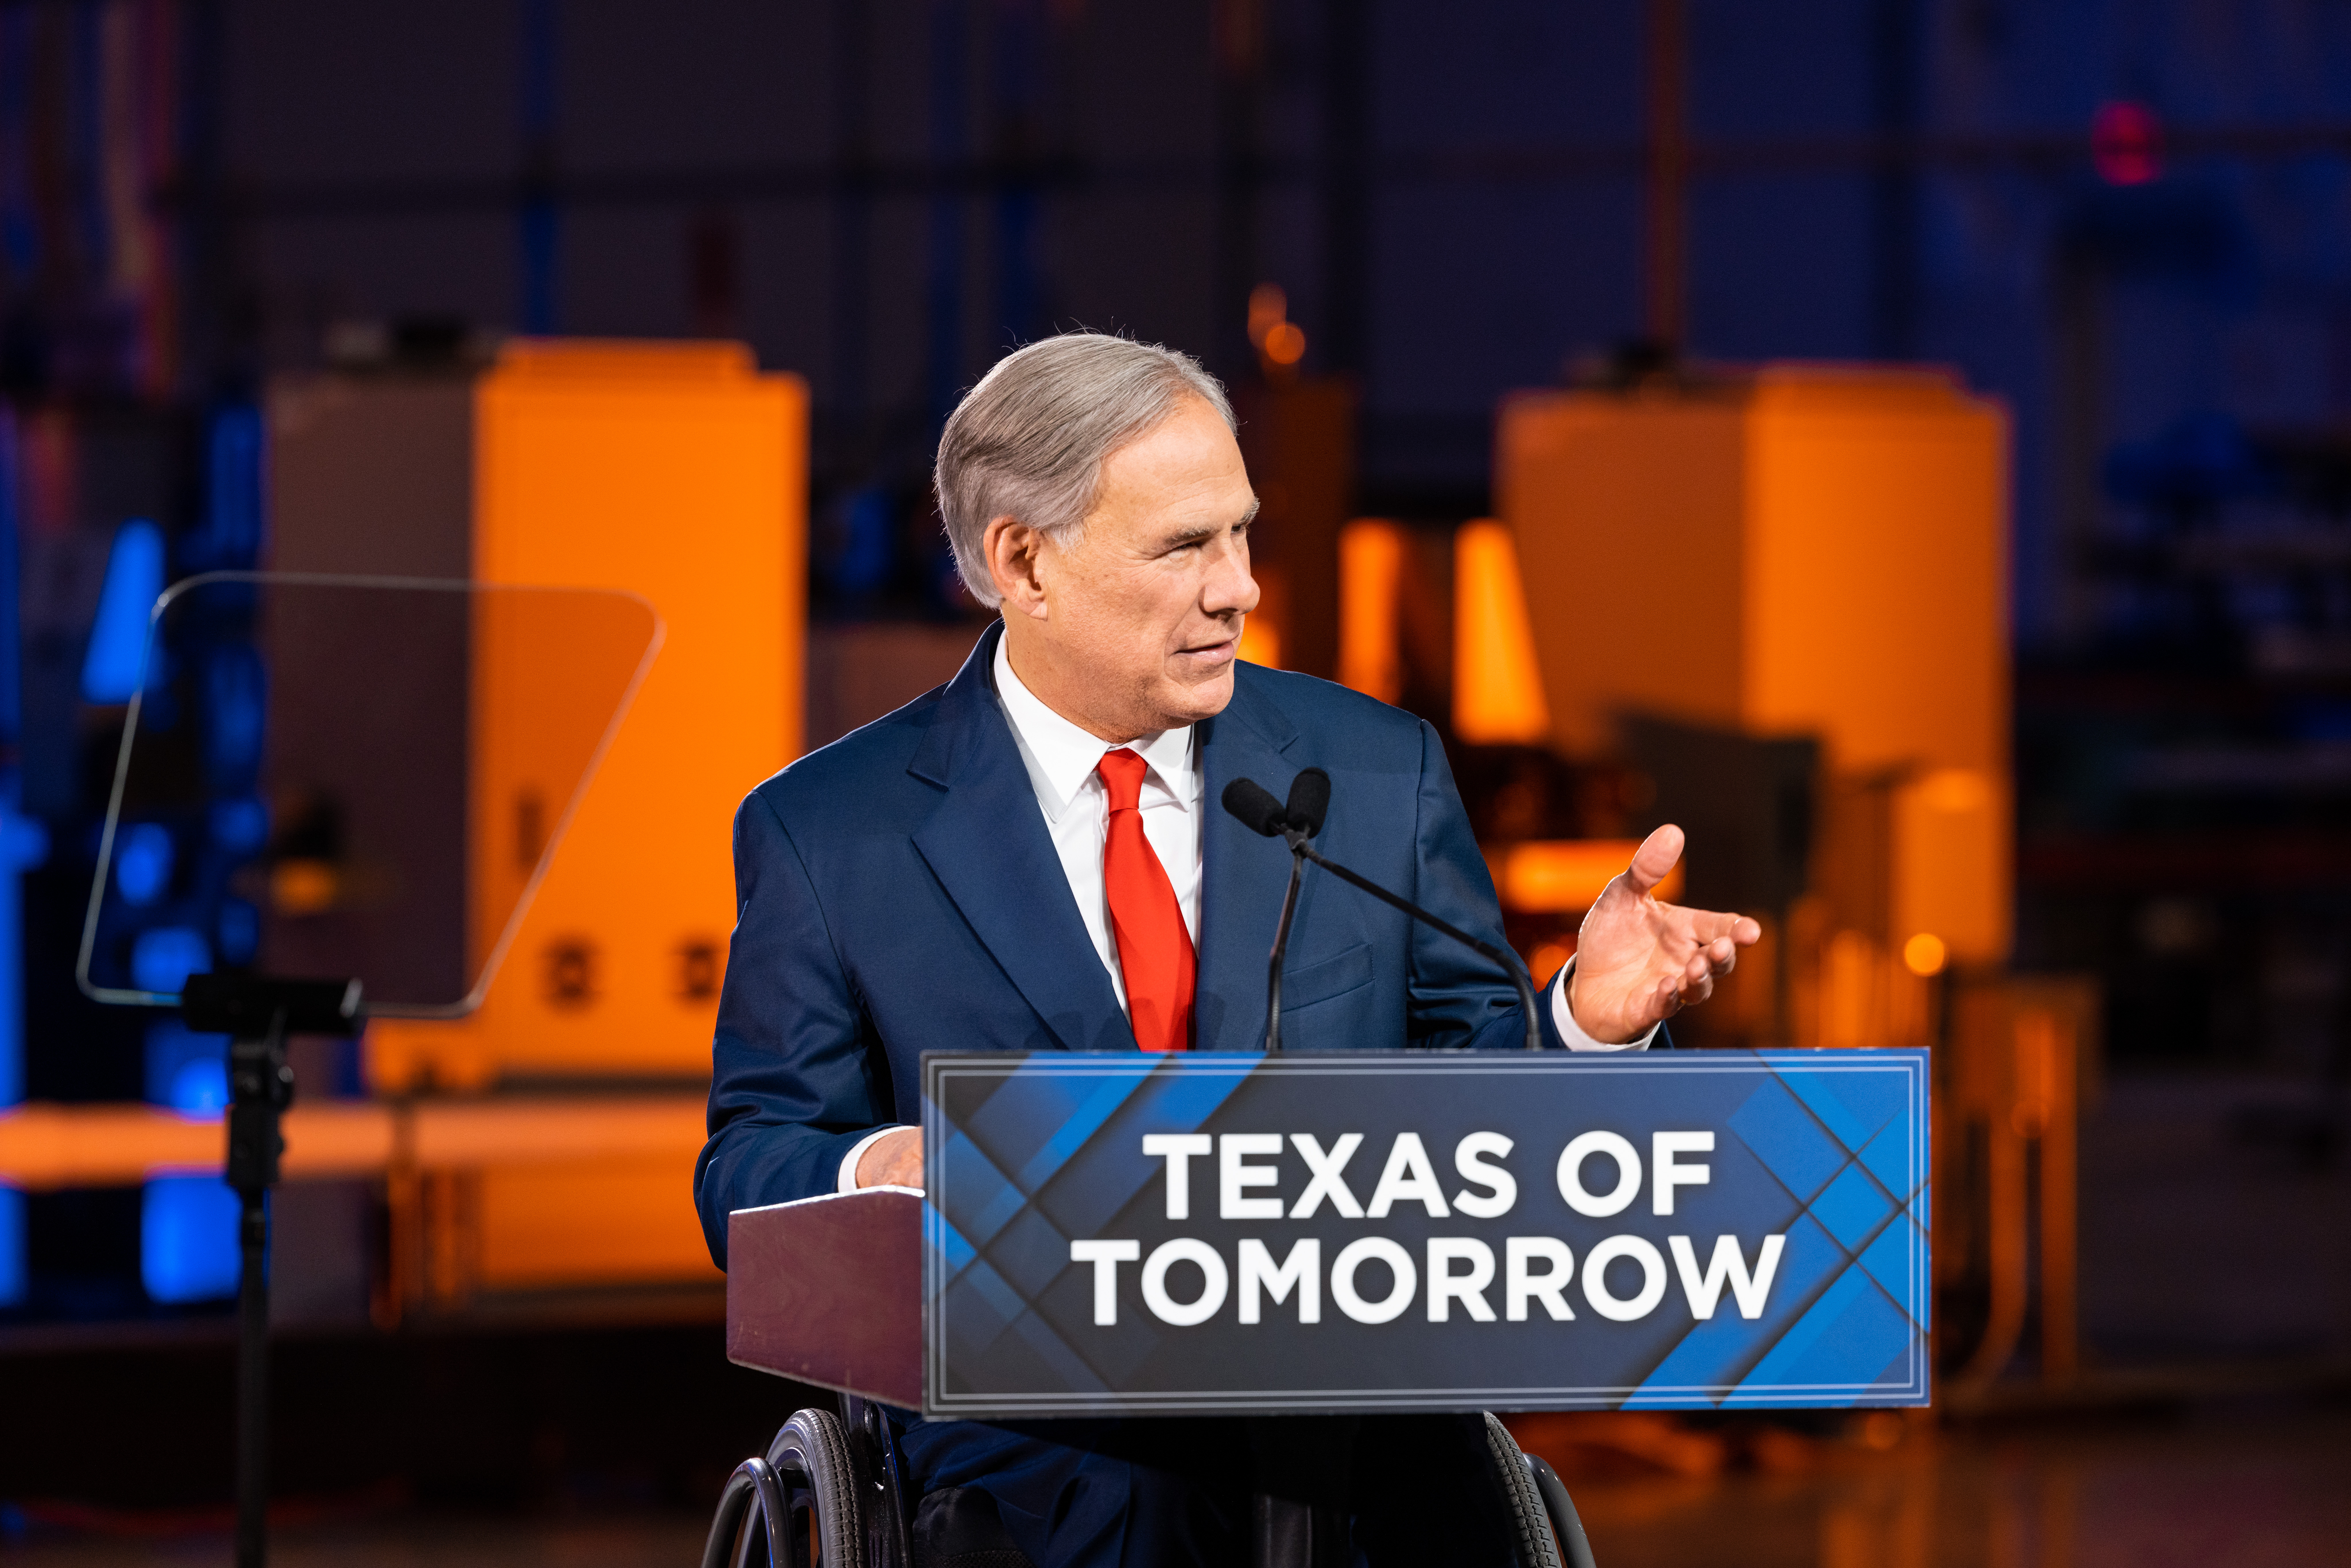 Governor Greg Abbott delivered his fifth State of the State speech on February 17.